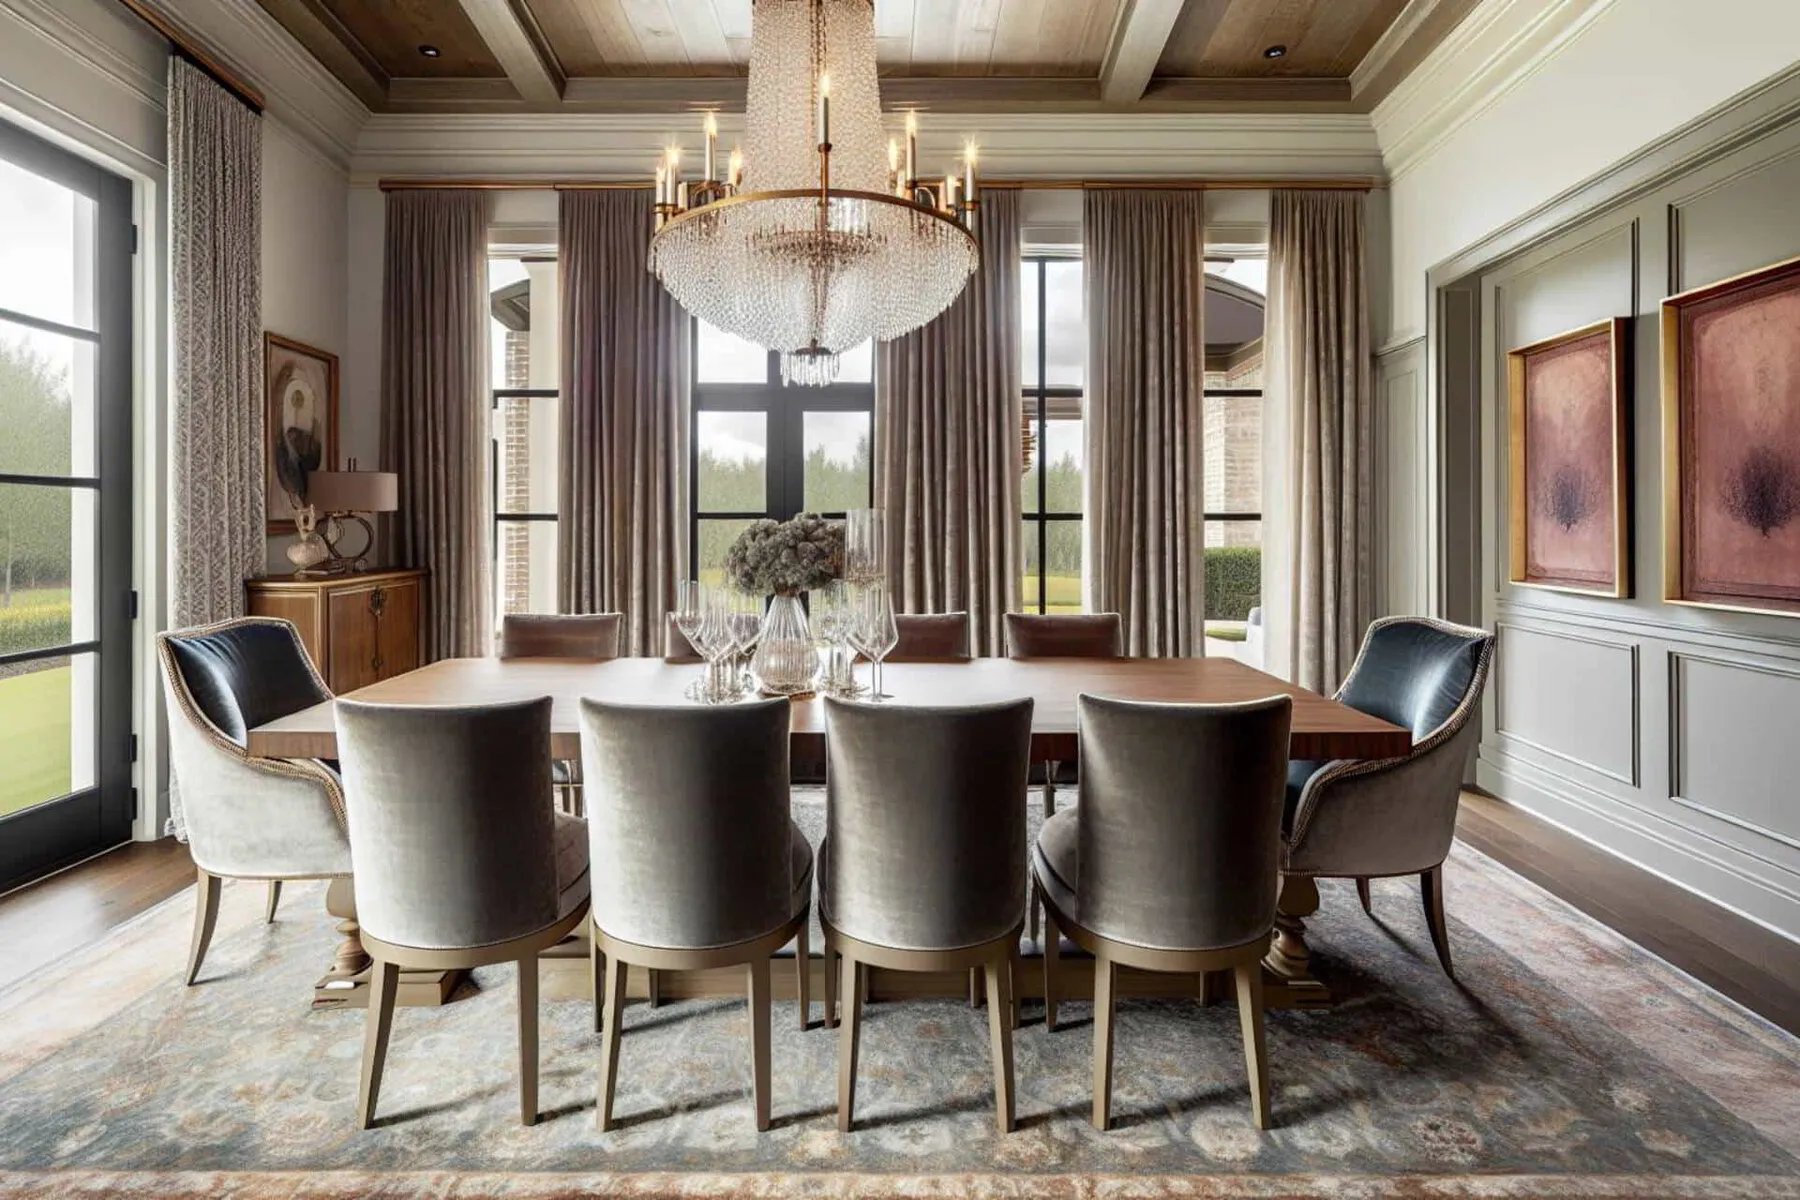 well-proportioned dining room with a focal point